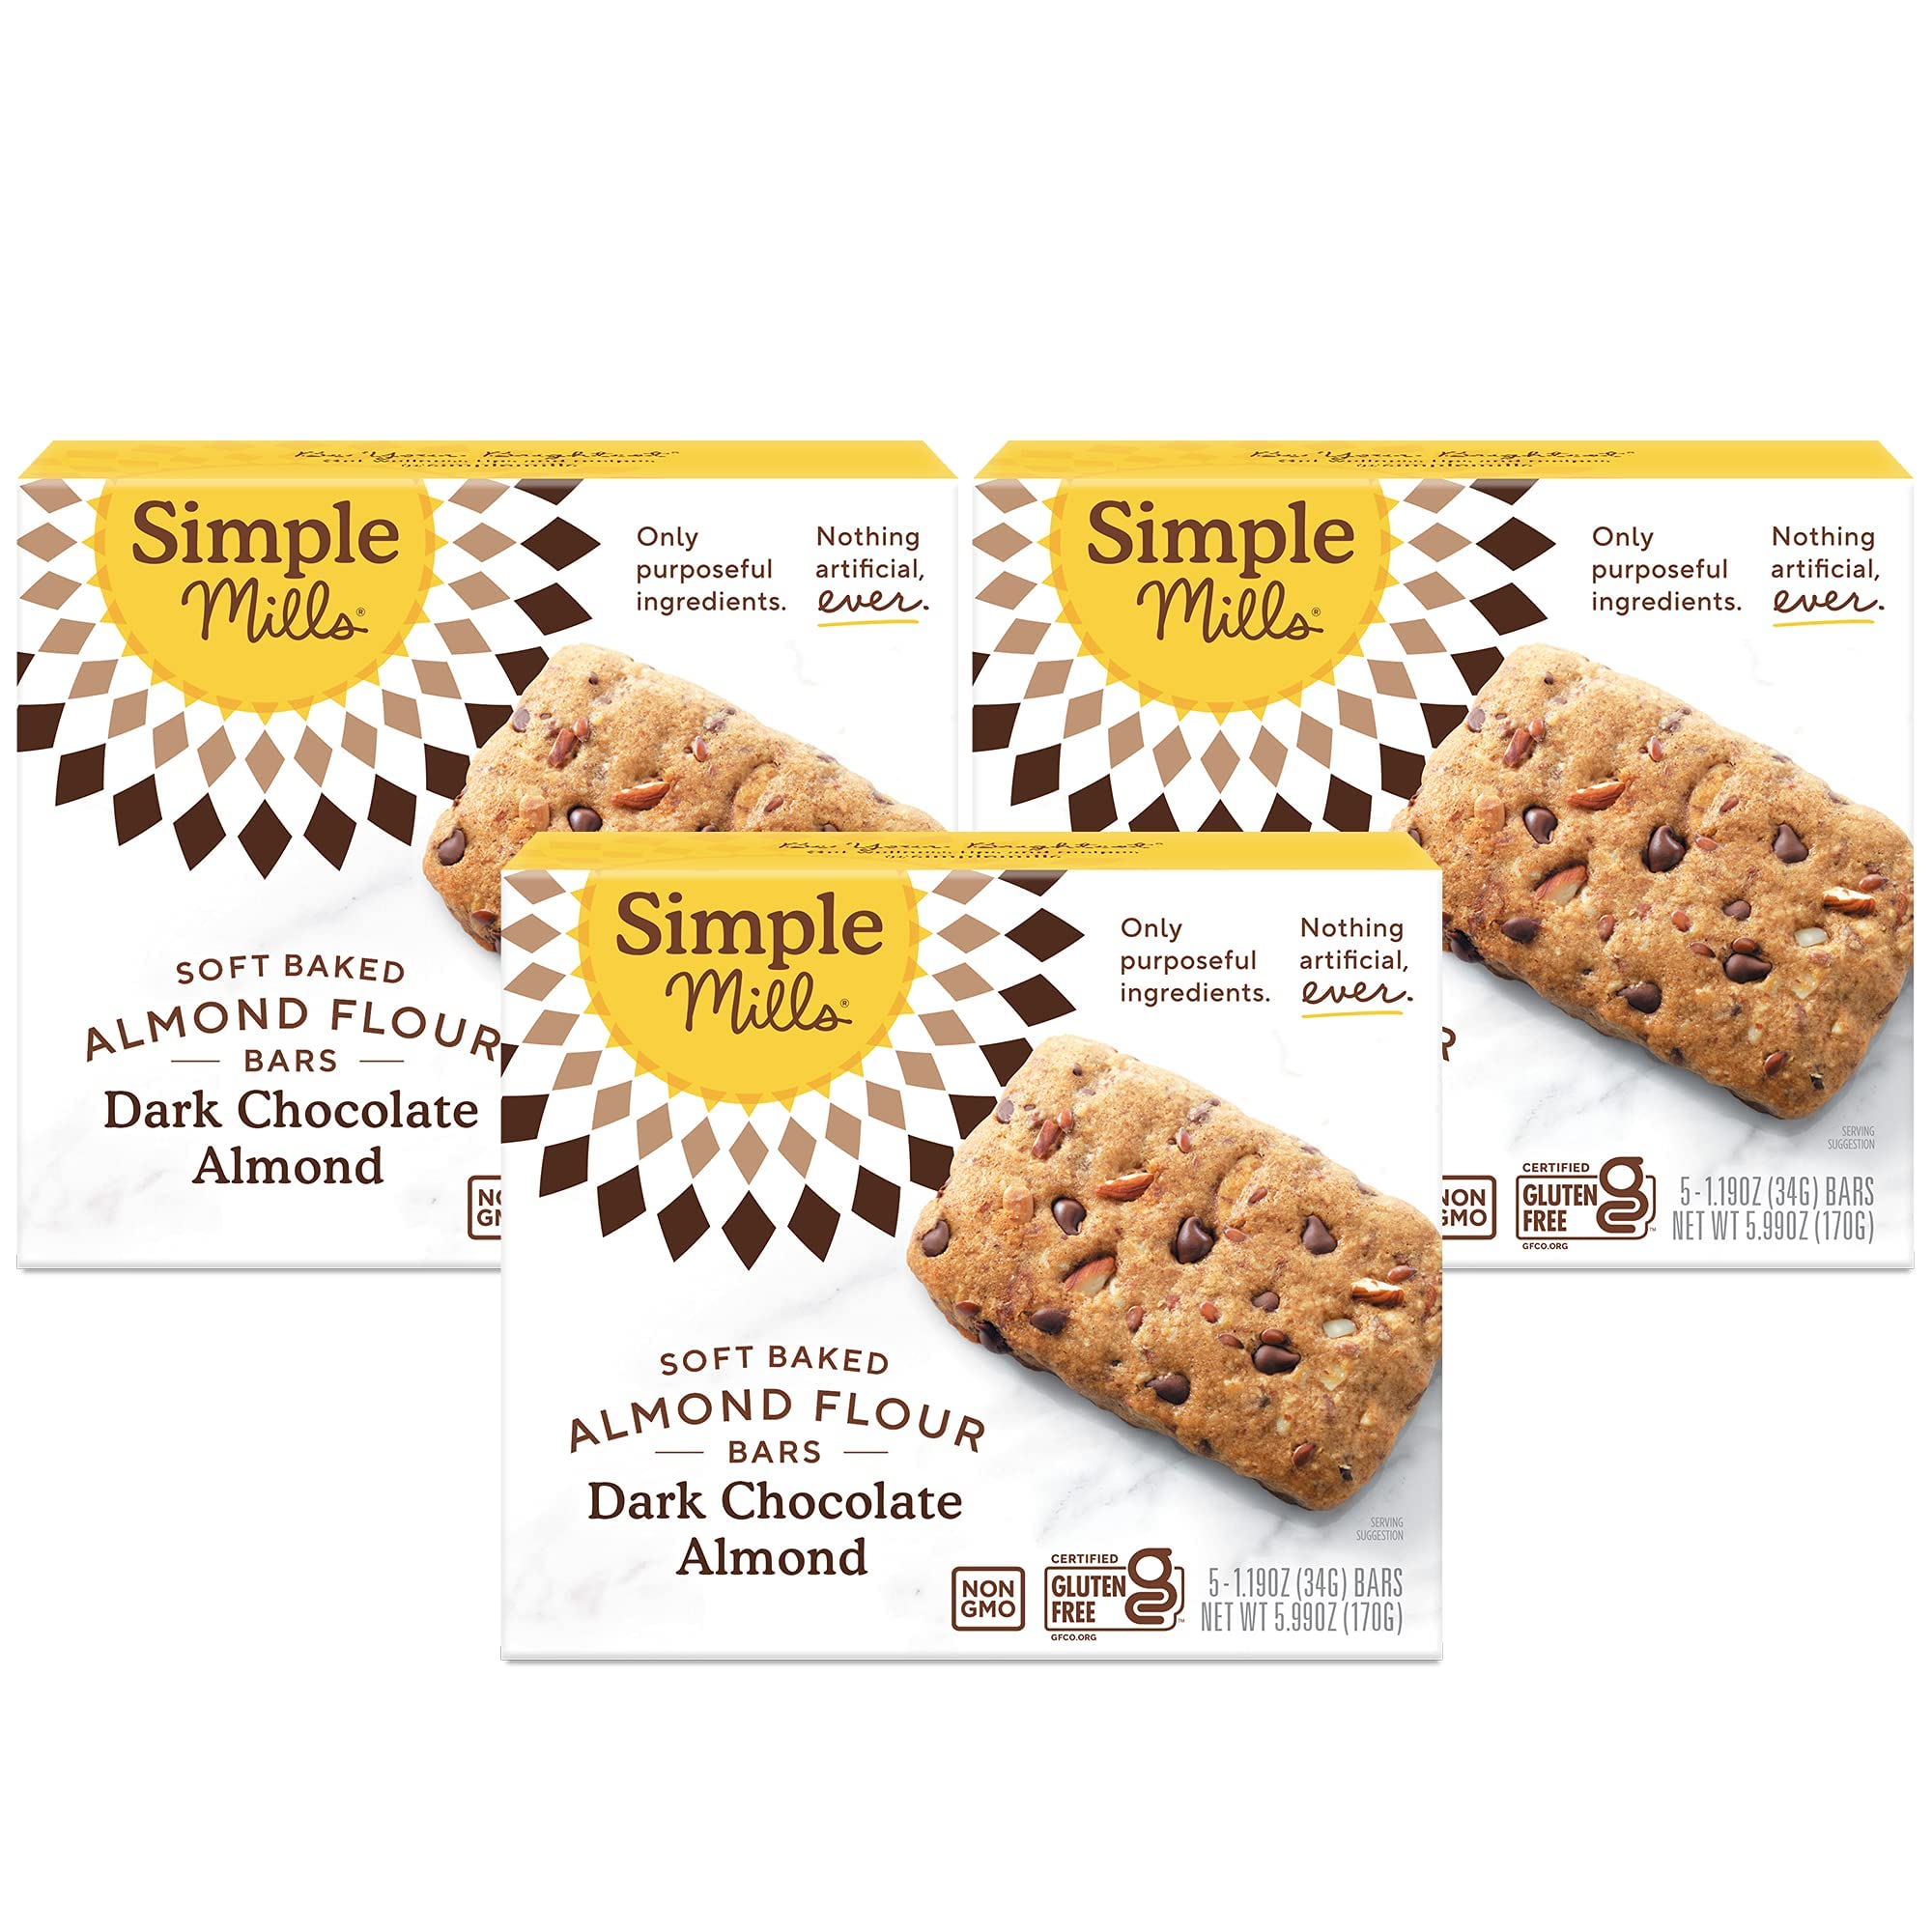 Simple Mills Almond Flour Snack Bars, Dark Chocolate Almond - Gluten Free, Made with Organic Coconut Oil, Breakfast Bars, Healthy Snacks, Paleo Friendly, 6 Ounce (Pack of 3) - $7